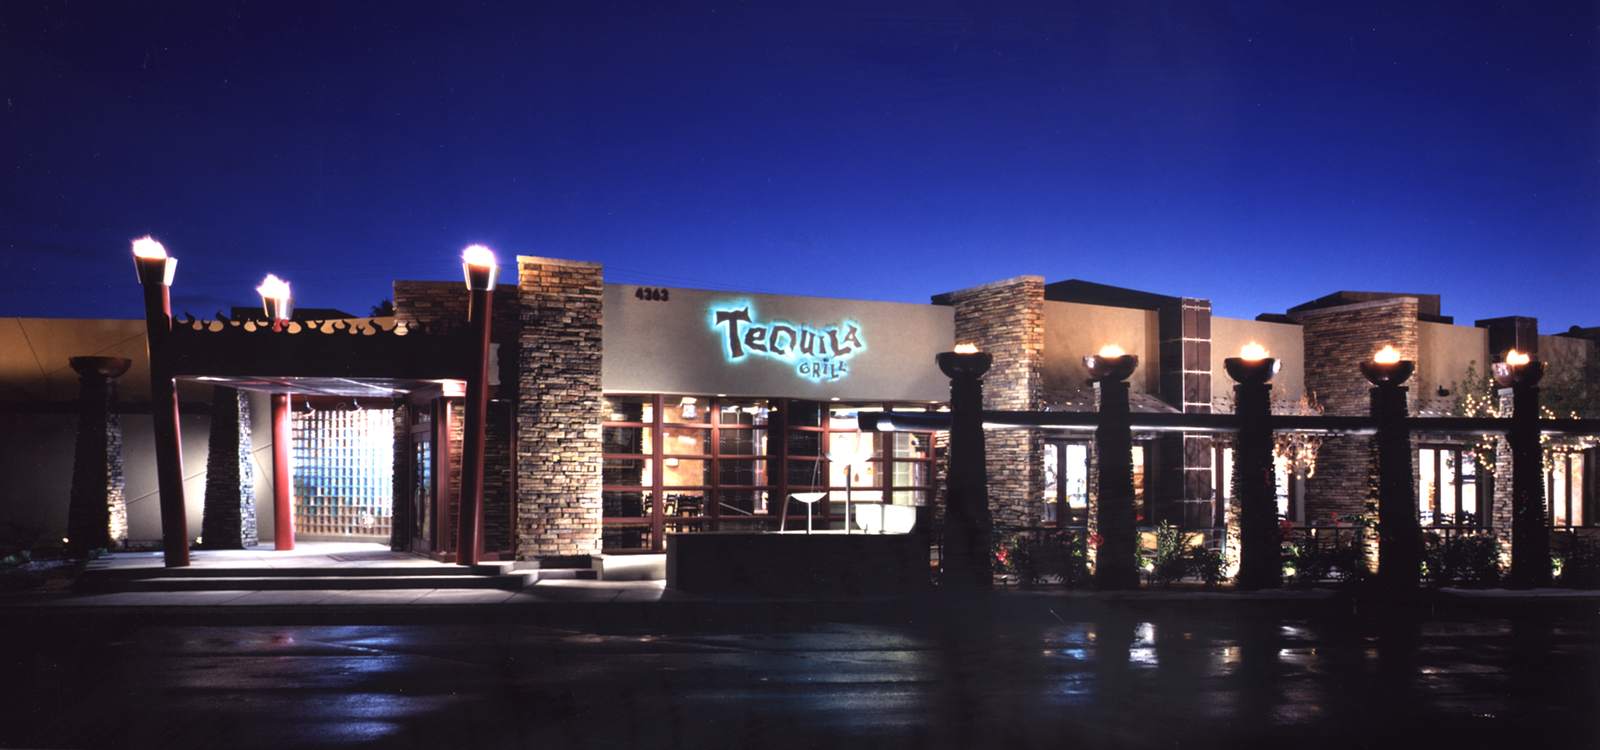 Tequila Grill exterior